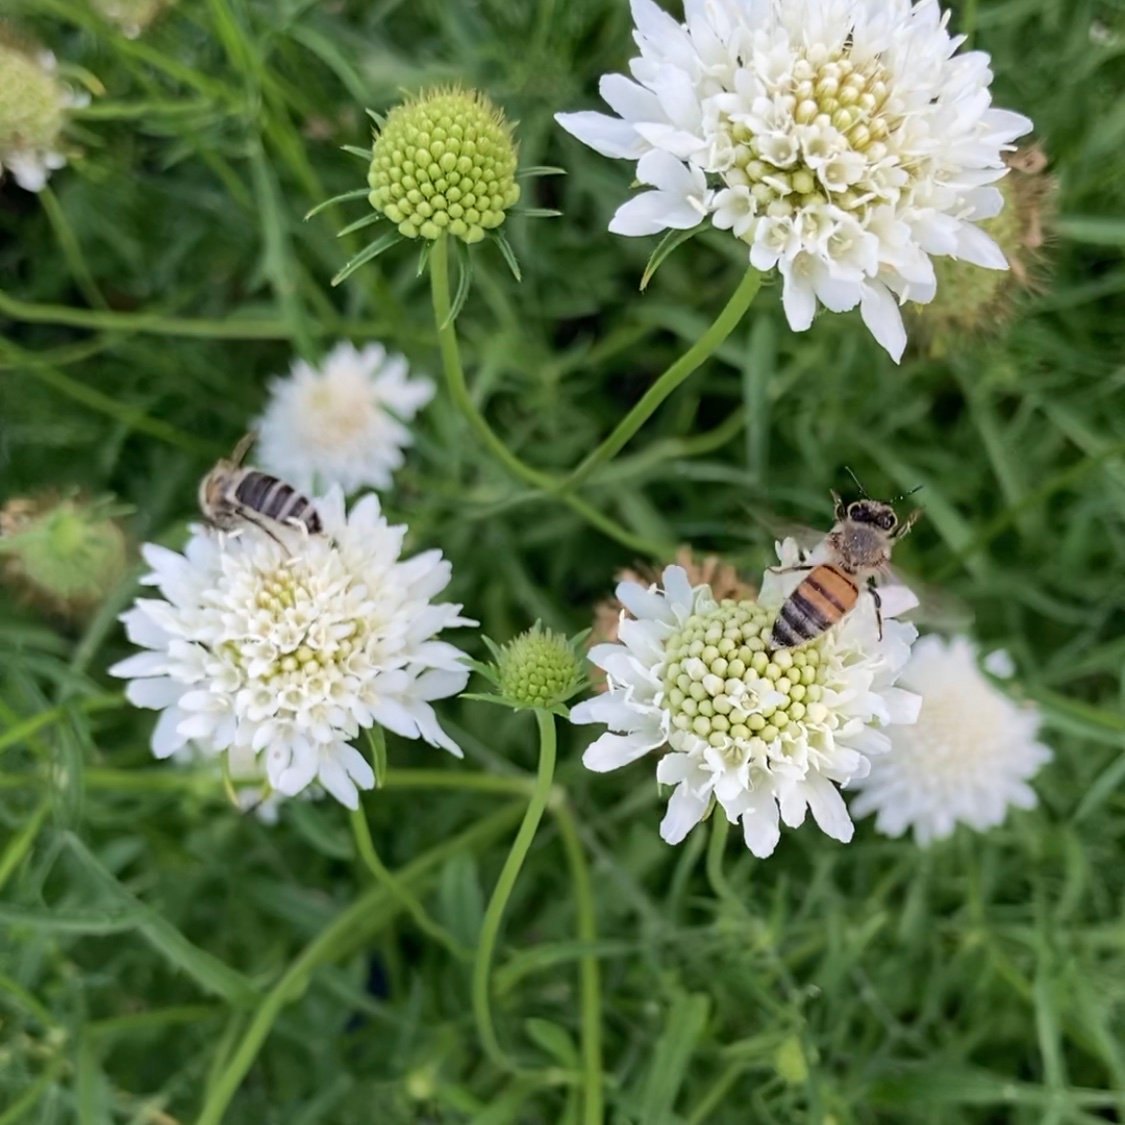 bees on flowers